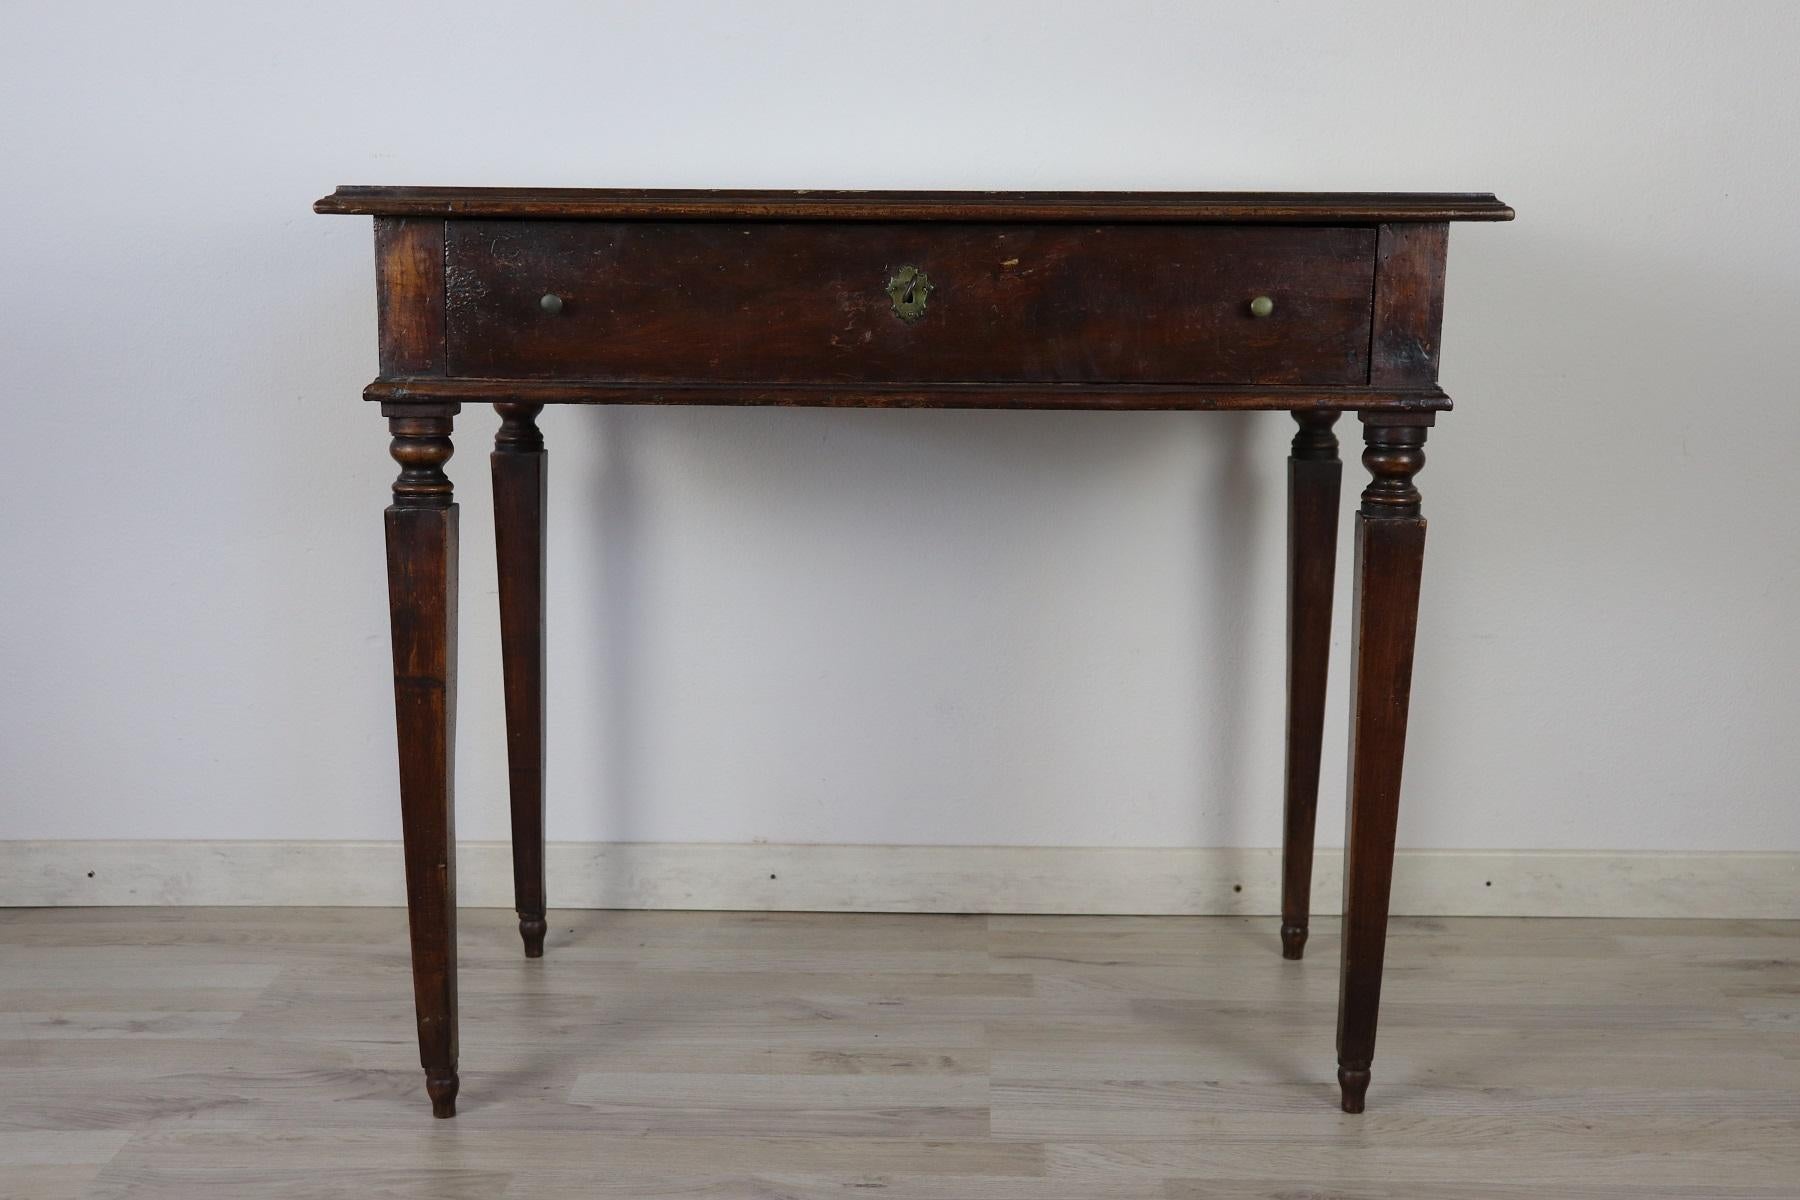 Elegant and essential antique Italian writing desk. Louis XVI period with Classic spiked legs. Present one drawer on the front. Locks and nails of the 19th century. Beautiful walnut wood.